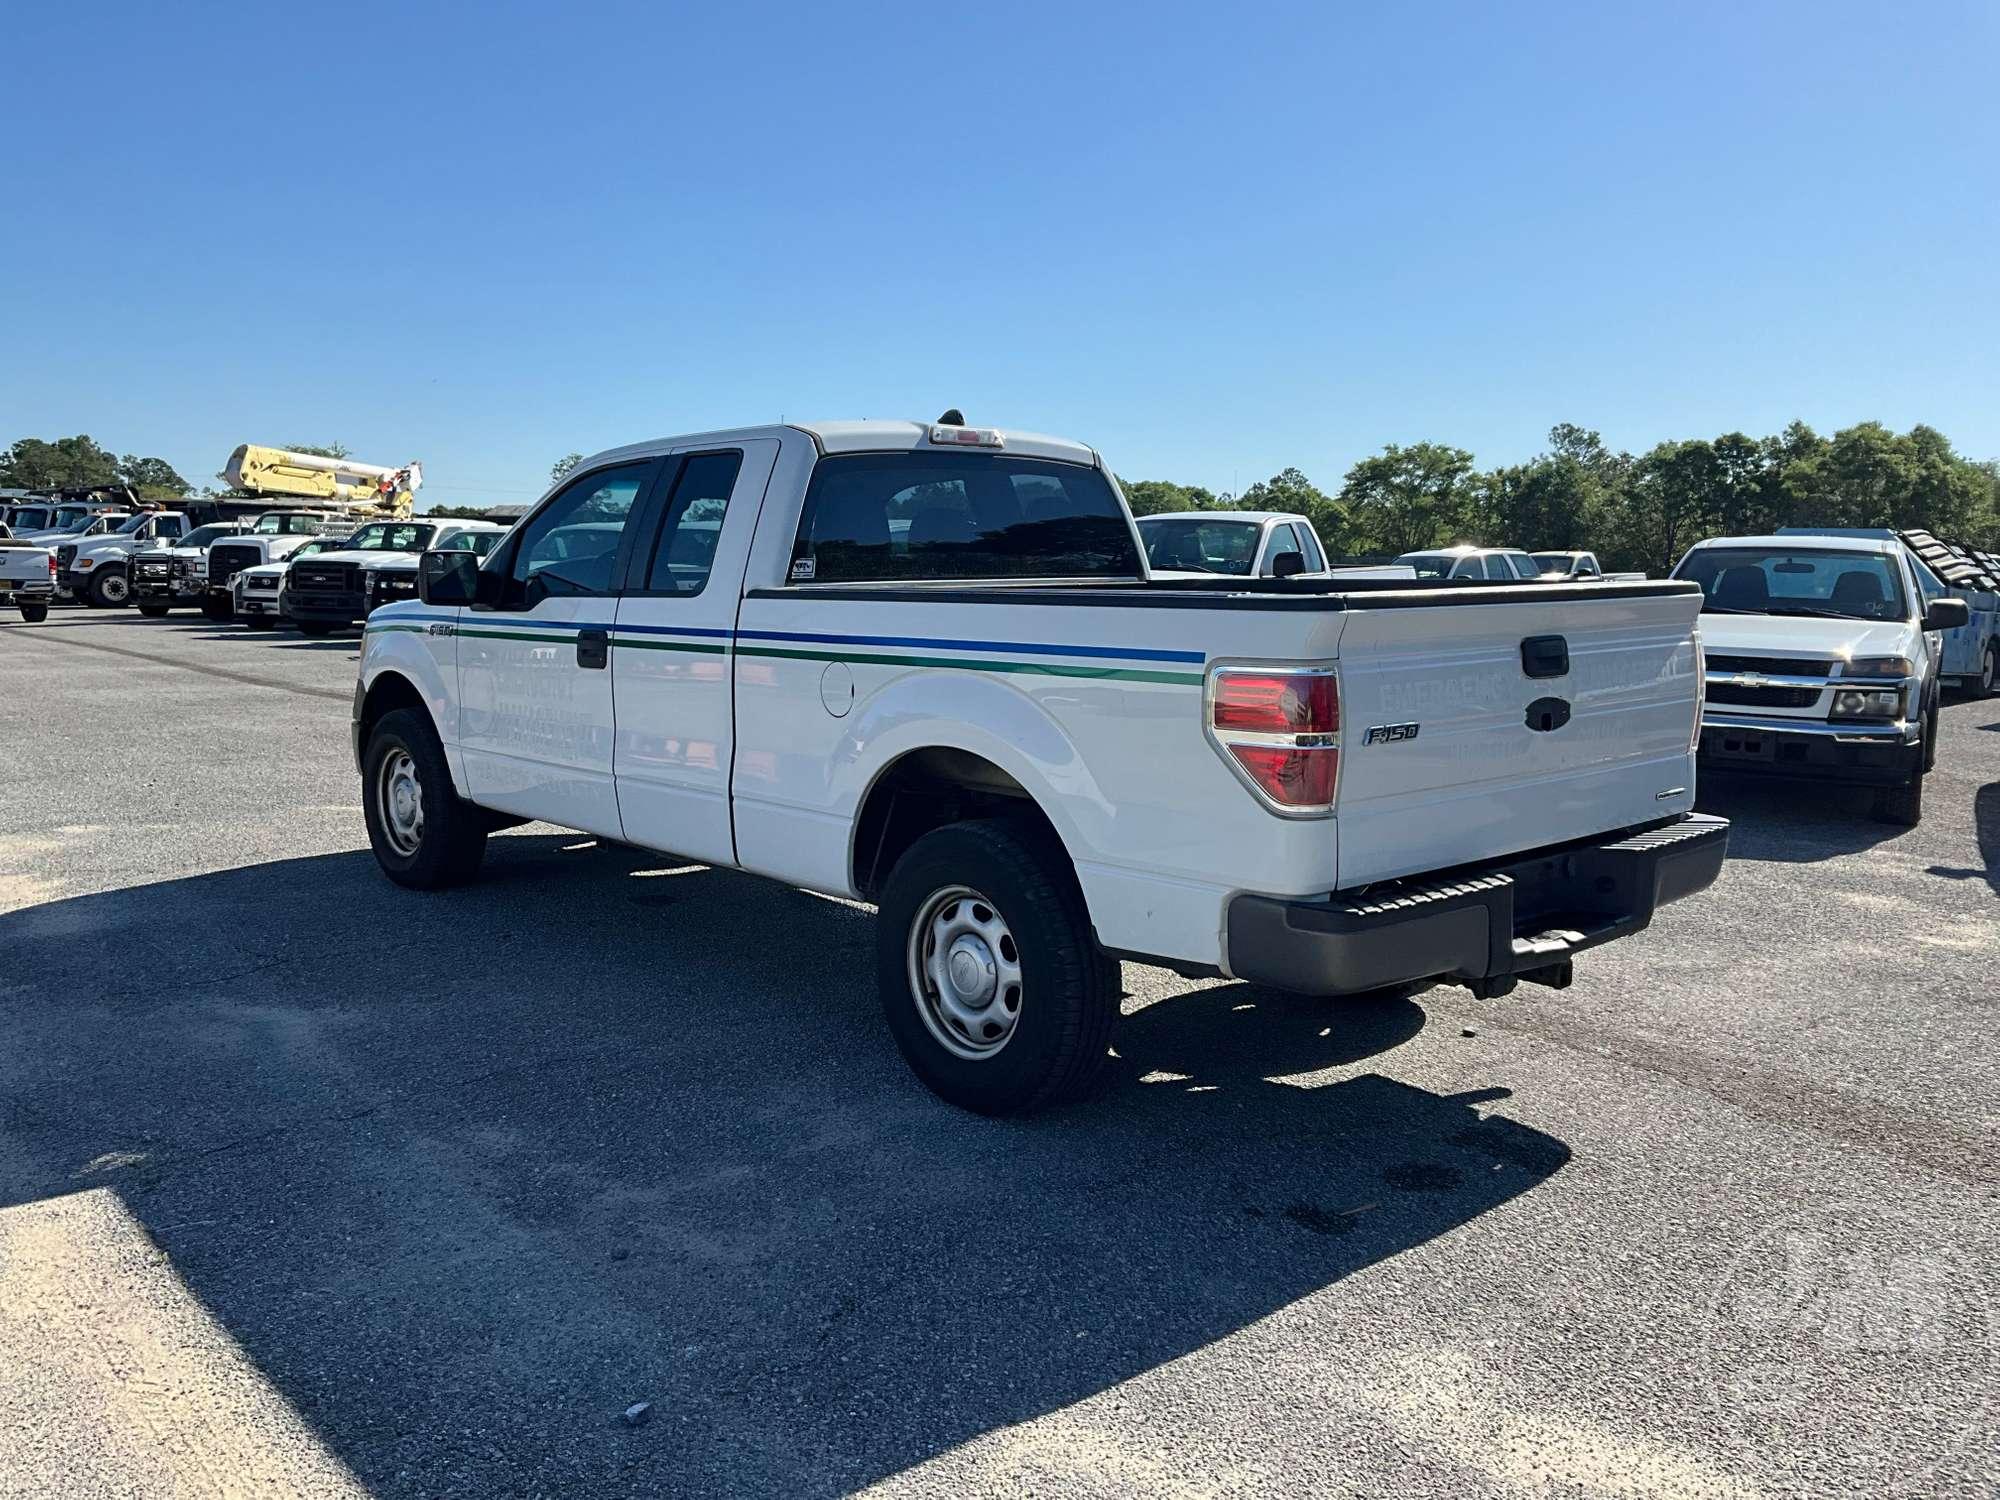 2011 FORD F-150 XL EXTENDED CAB 4X4 PICKUP VIN: 1FTFX1EF2BFB46960